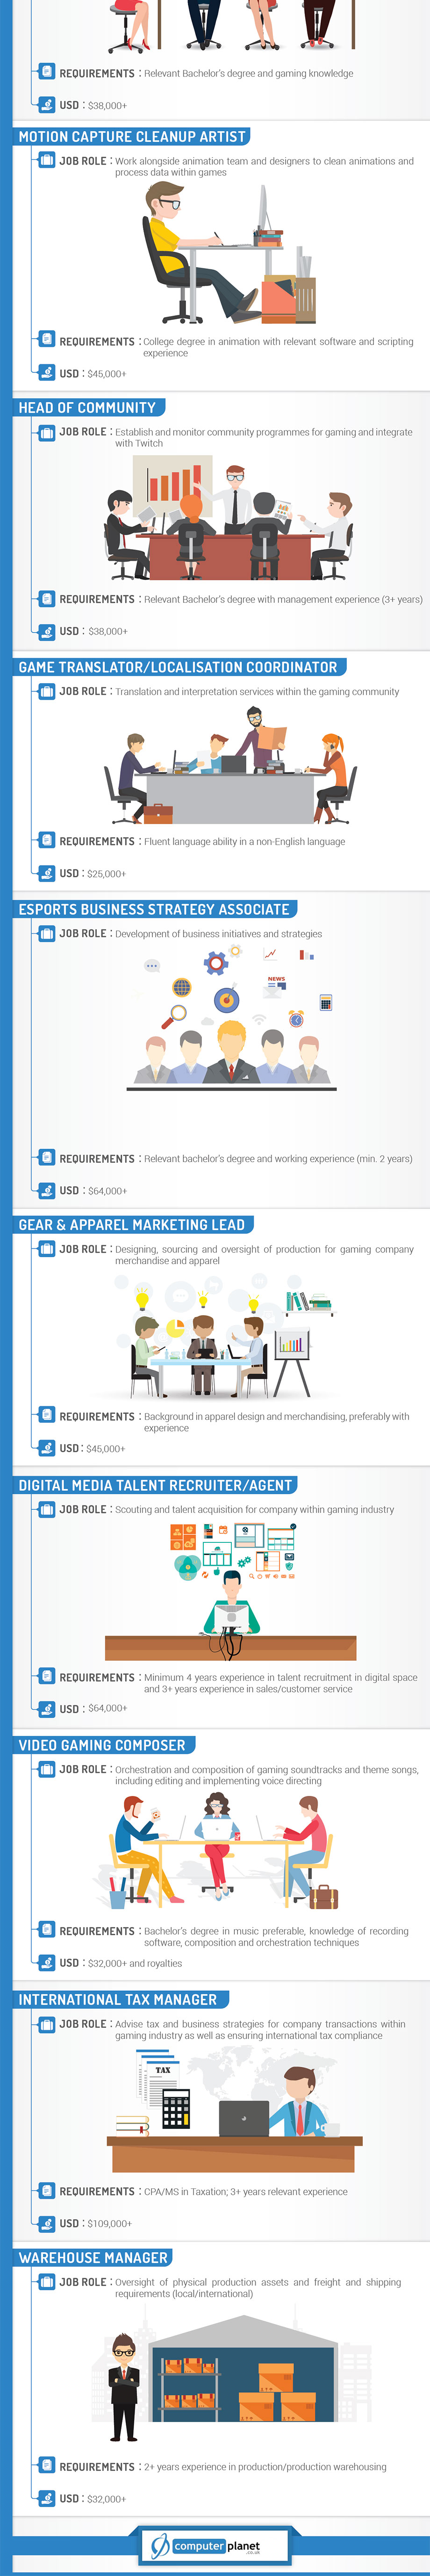 Career Opportunities in the eSports Industry (Infographic) - 2